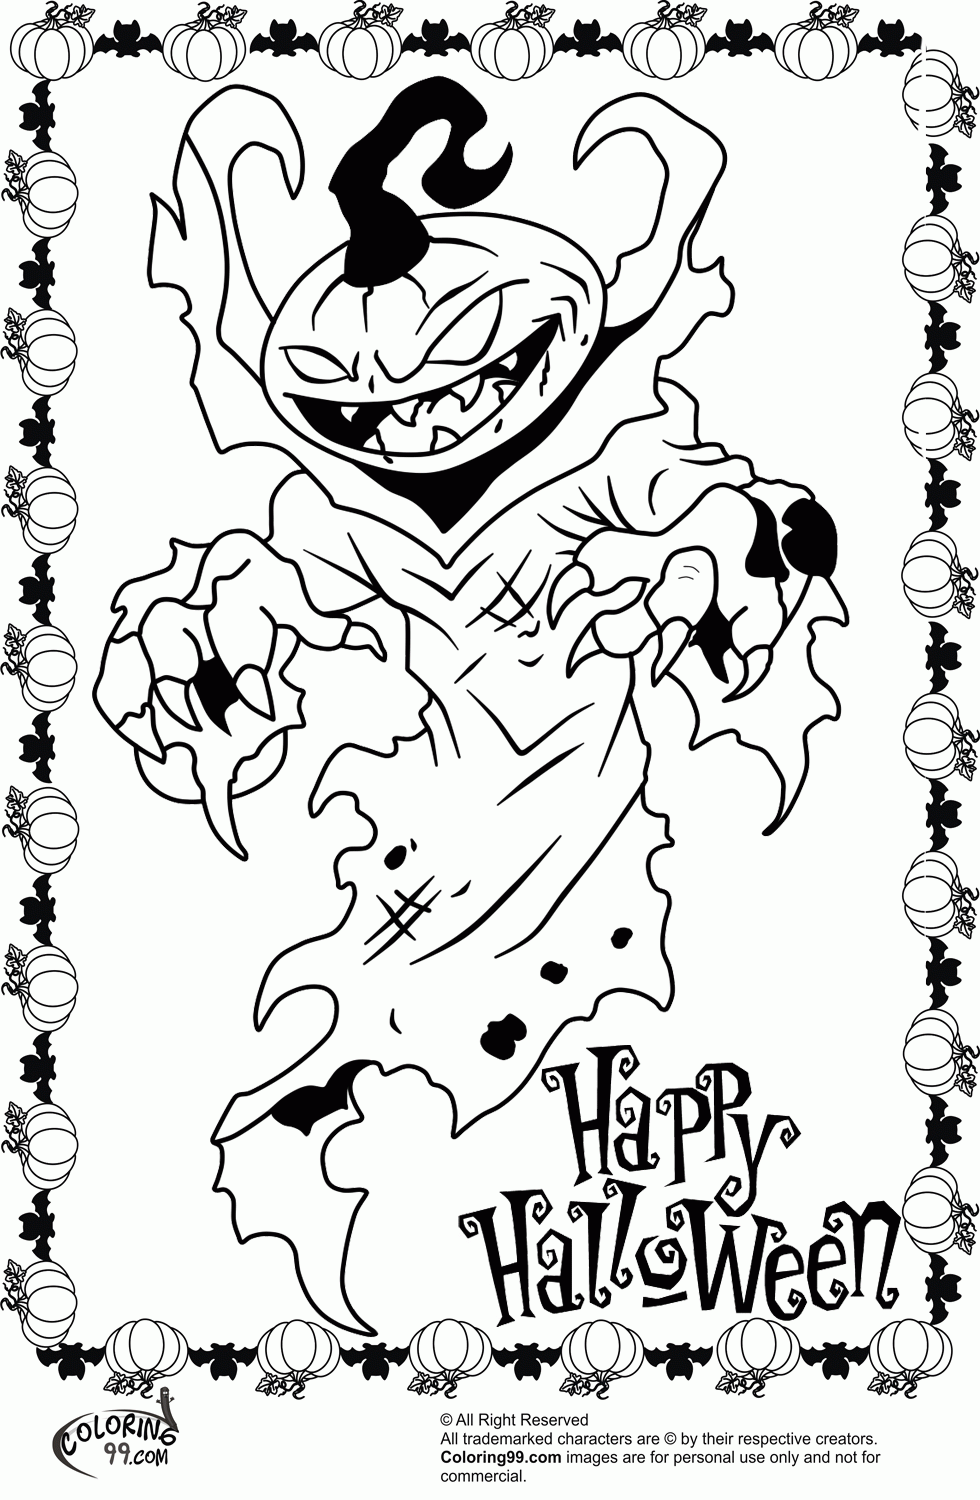 20 Pics Of Scary Demon Coloring Pages   Scary Halloween Coloring ...